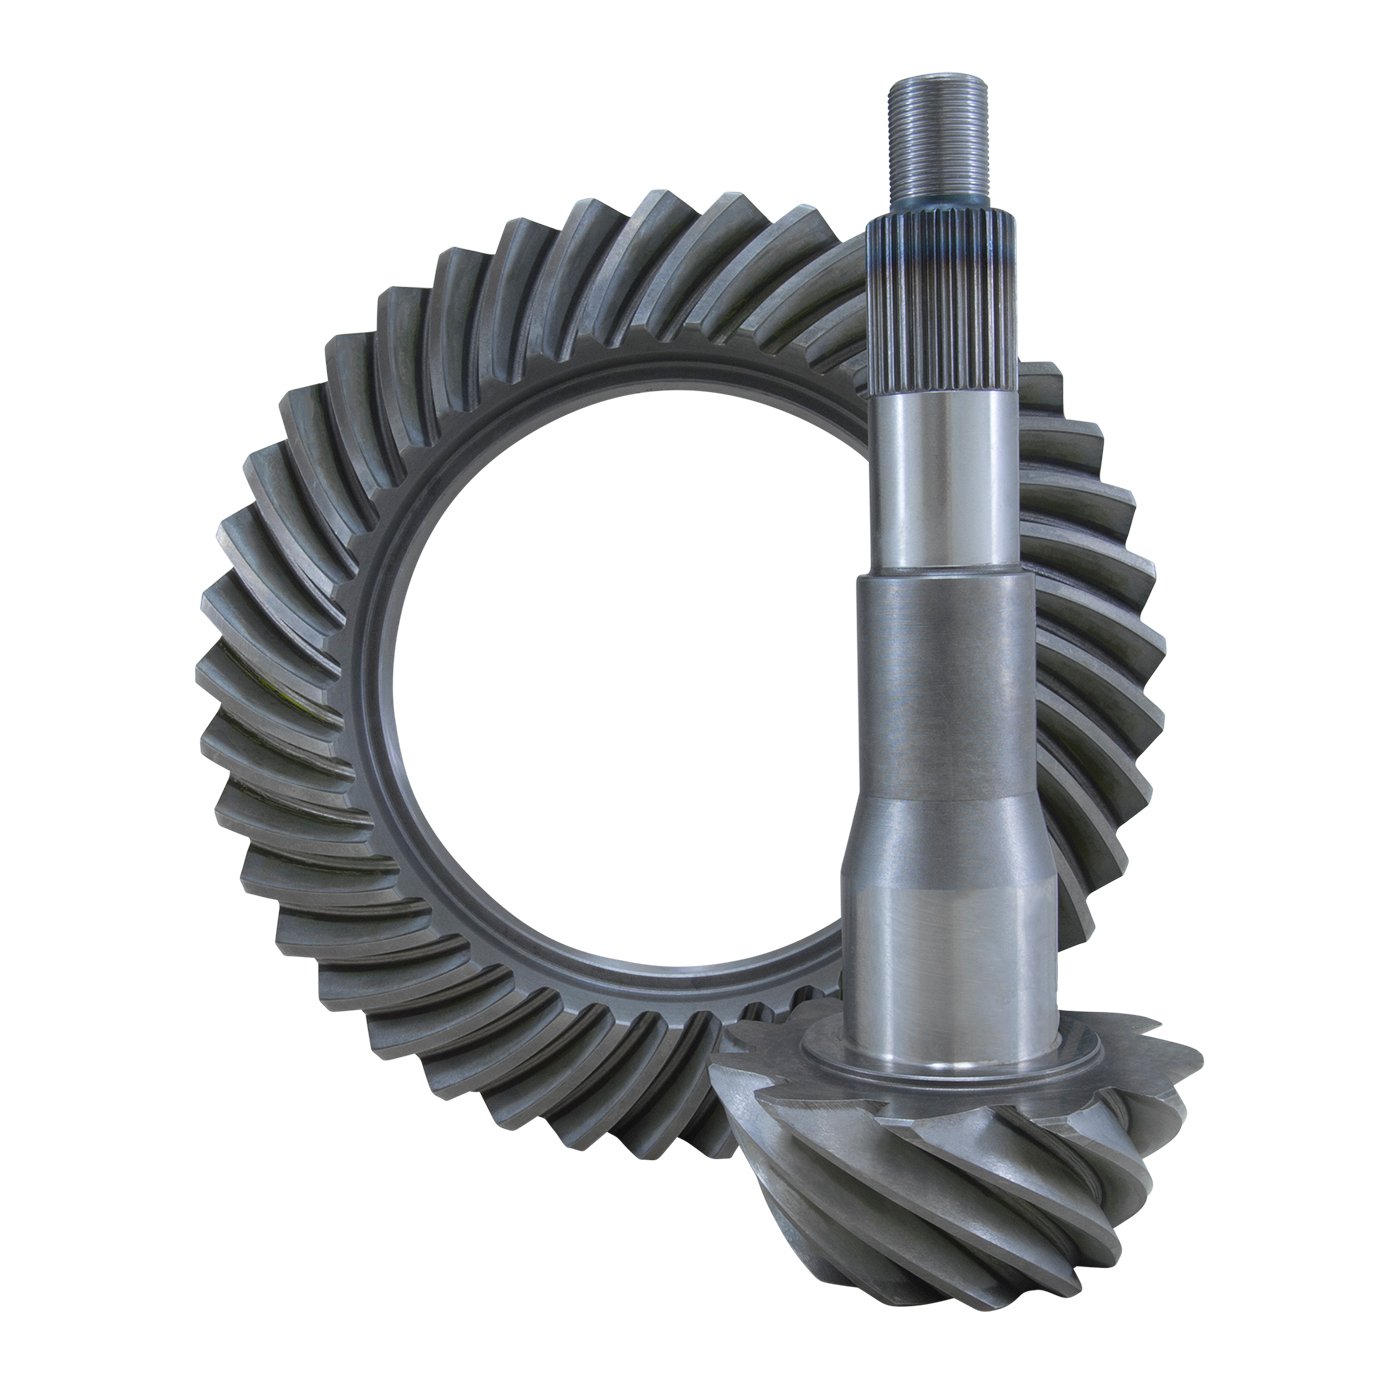 USA Standard 36102 Ring & Pinion Gear Set, For Ford 10.25 in., 3.55 Ratio